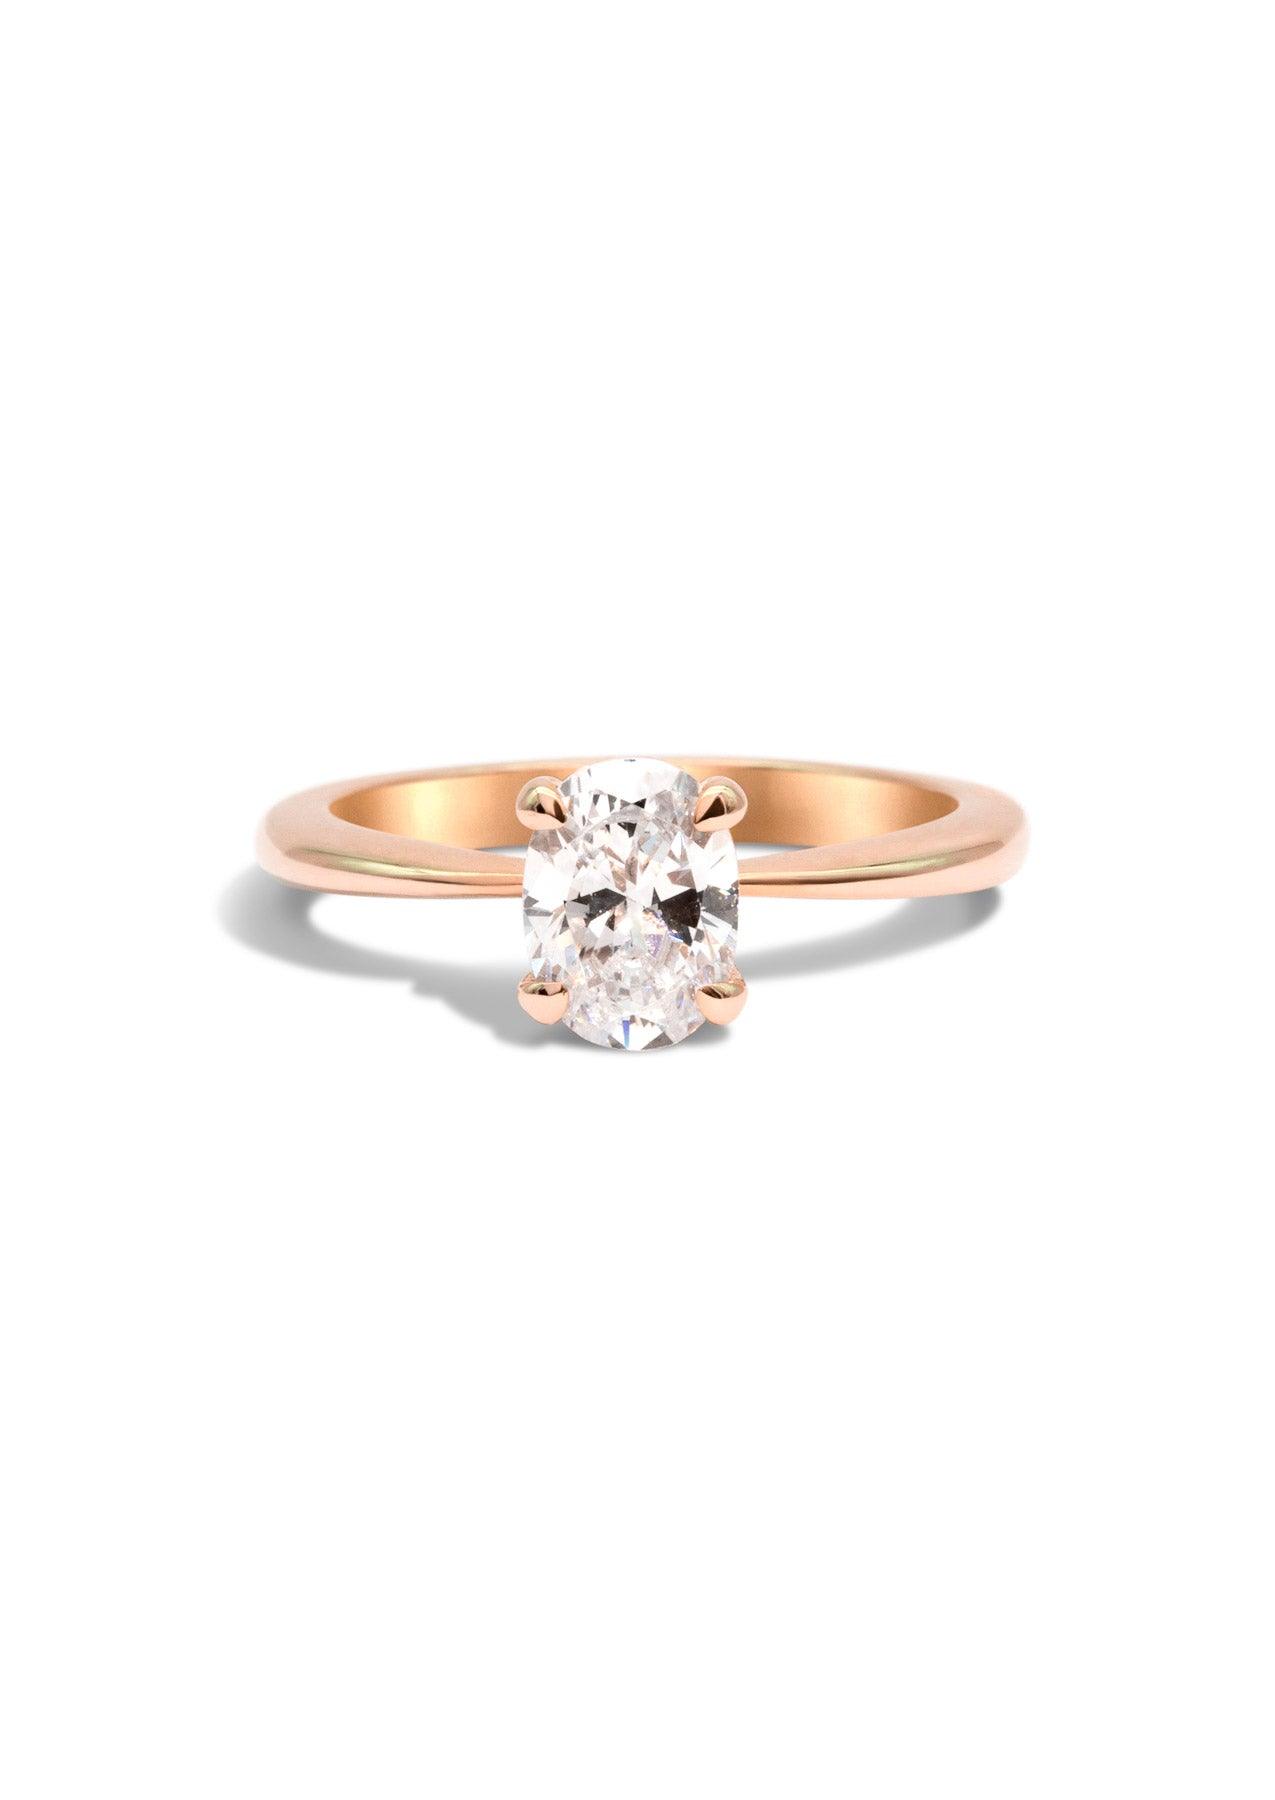 The June Rose Gold Cultured Diamond Ring